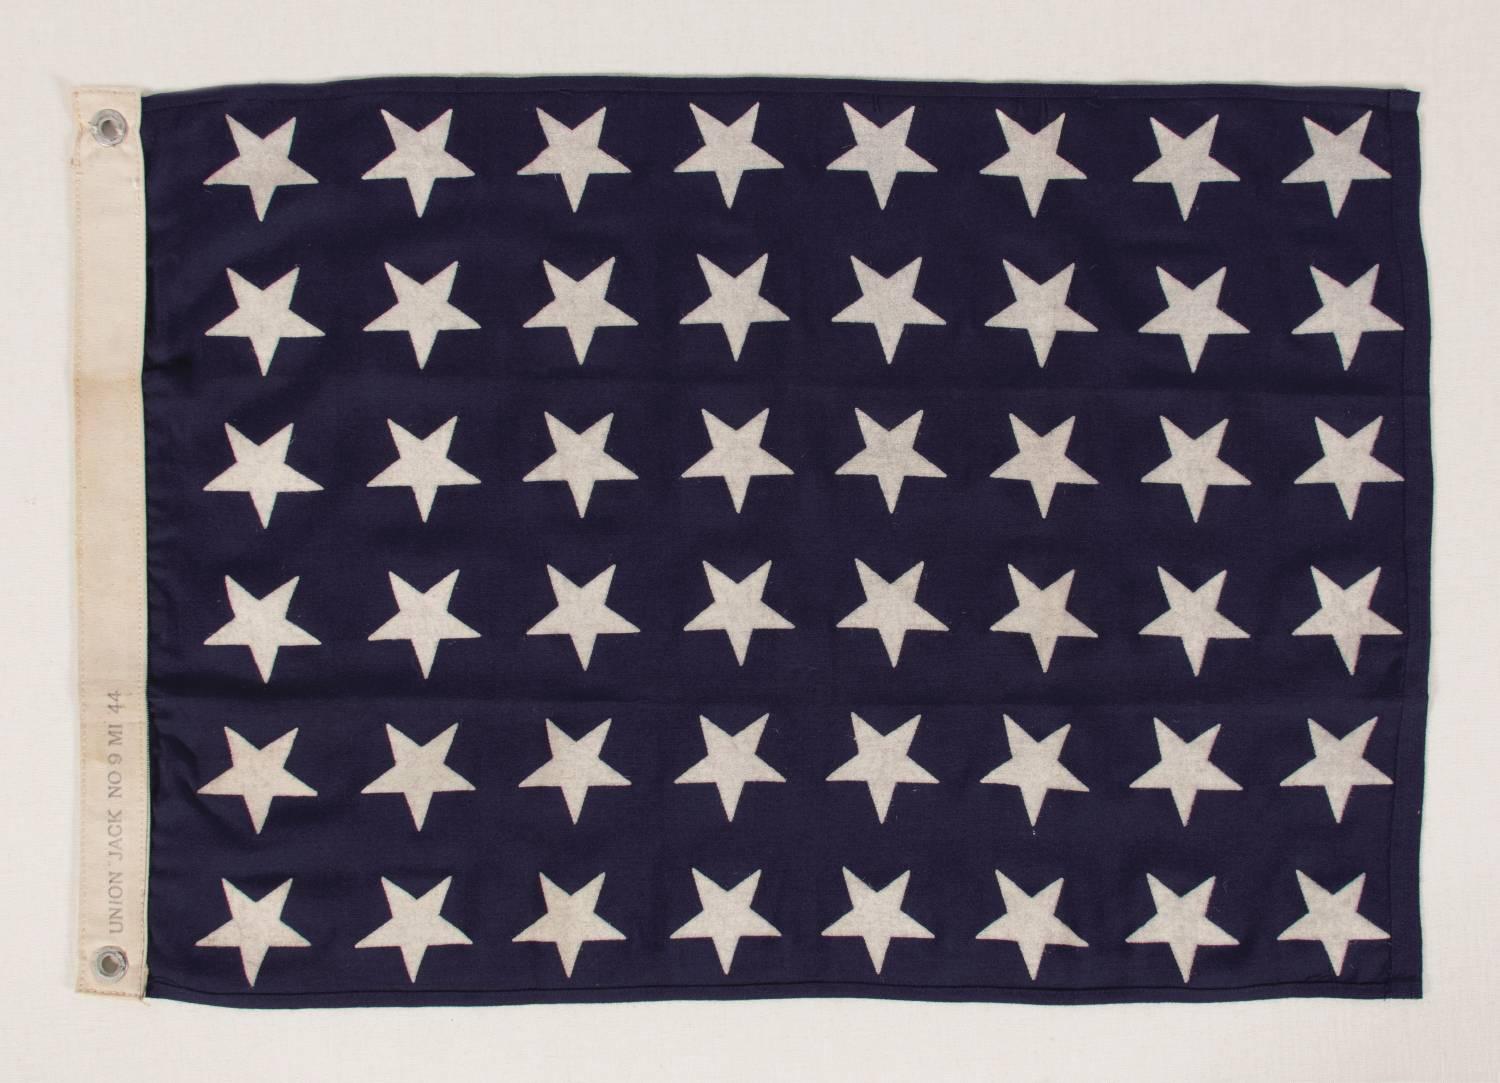 48 star U.S. Navy jack, made at mare Island, California, headquarters of the pacific fleet, during WWII, dated 1944:

 United States Navy jack with 48 stars, made during WWII (U.S. involvement 1941-1945) at Mare Island, California, Headquarters of